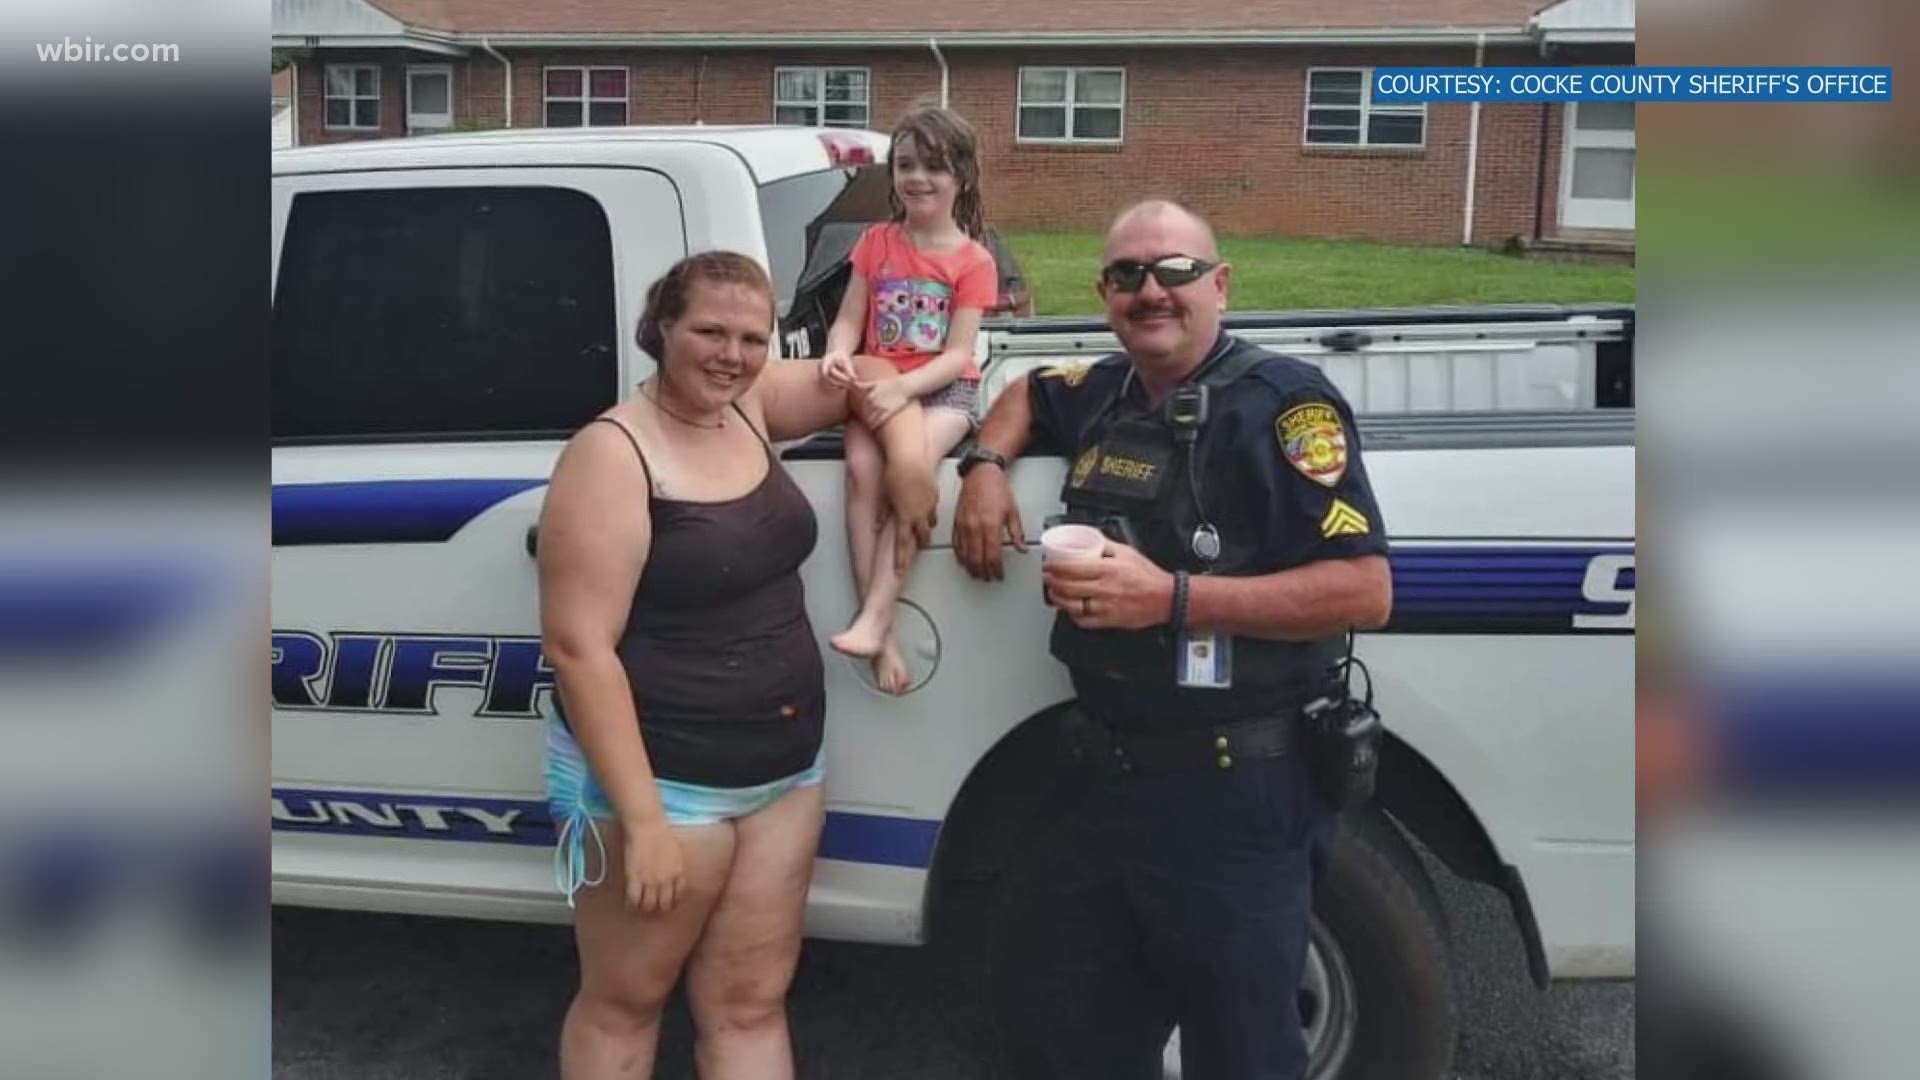 A Cocke County girl wanted an officer to stop by her lemonade stand for a drink. So, the sheriff's office obliged.